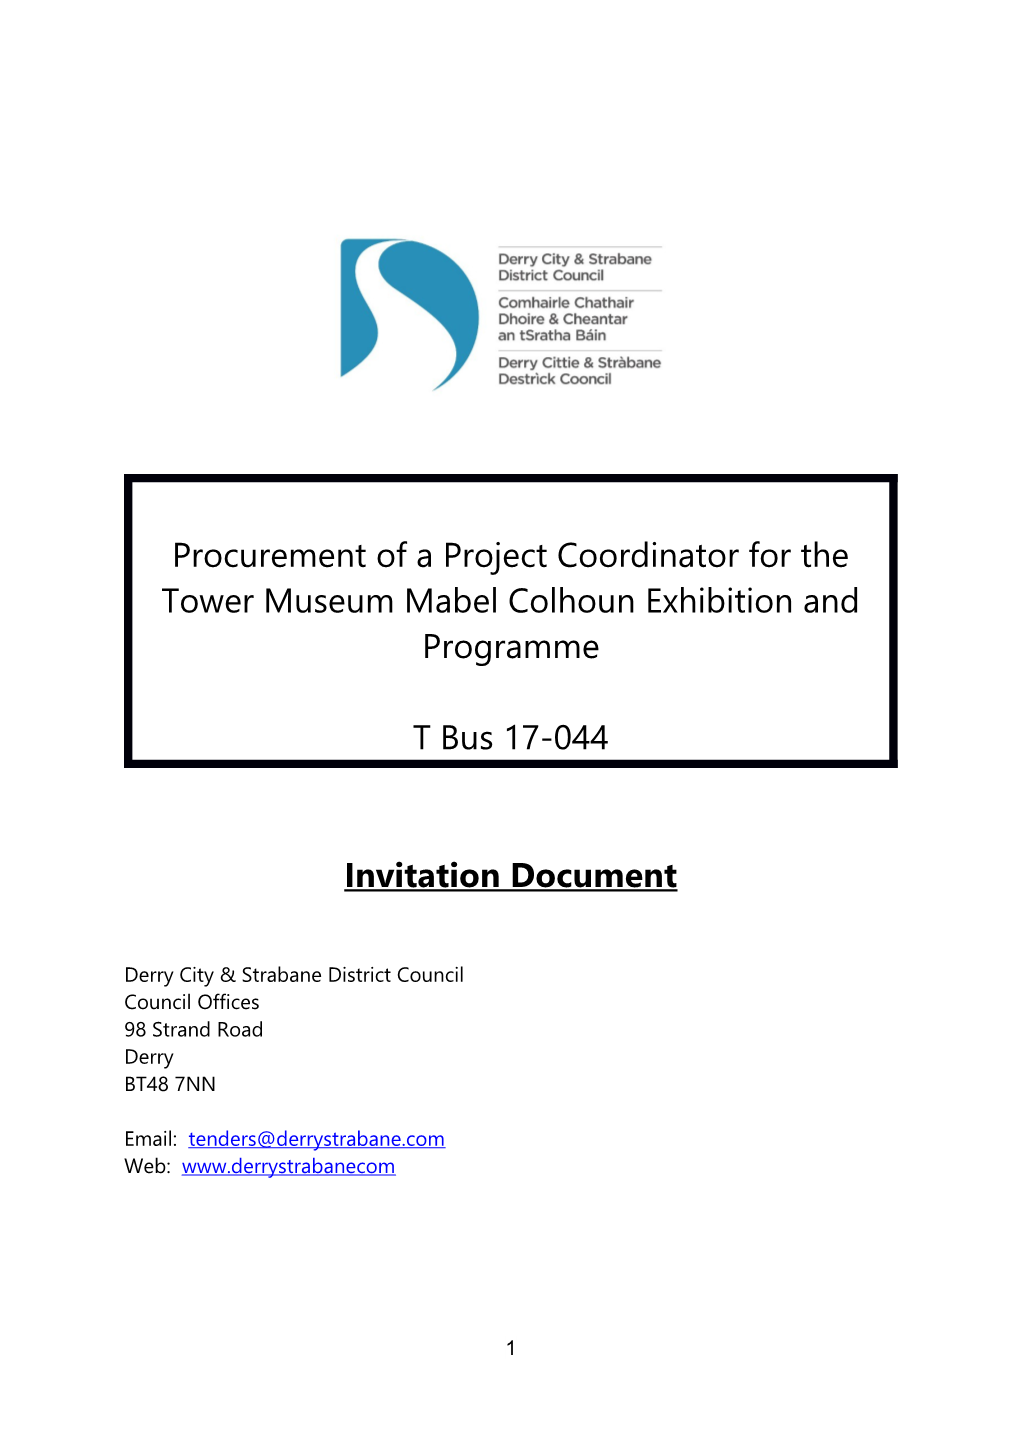 Procurement of a Project Coordinator for the Tower Museum Mabel Colhoun Exhibition and Programme